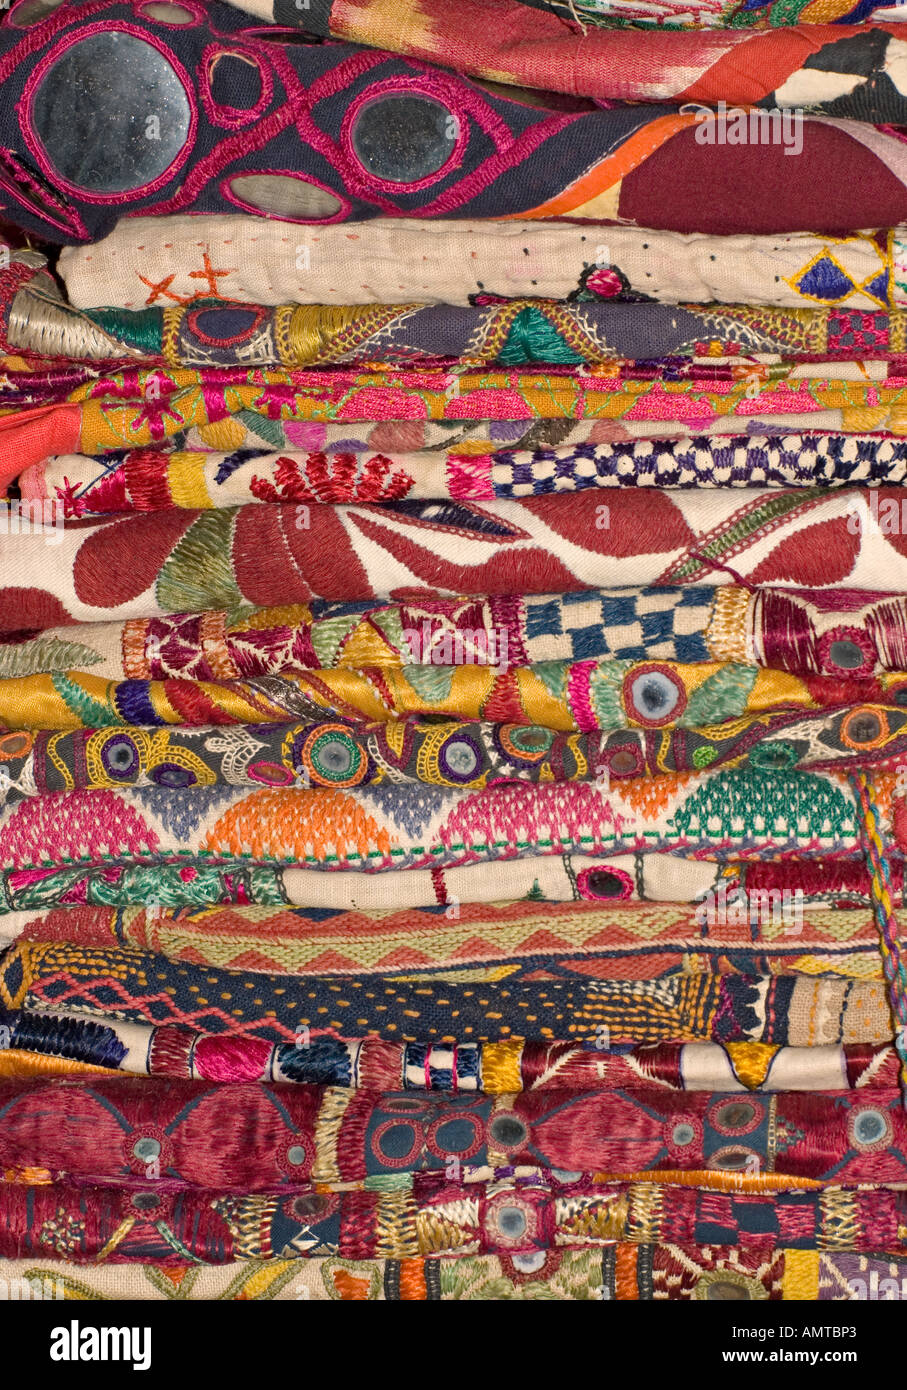 Stack of embroidered and applique textiles from Rajahstan India Stock Photo